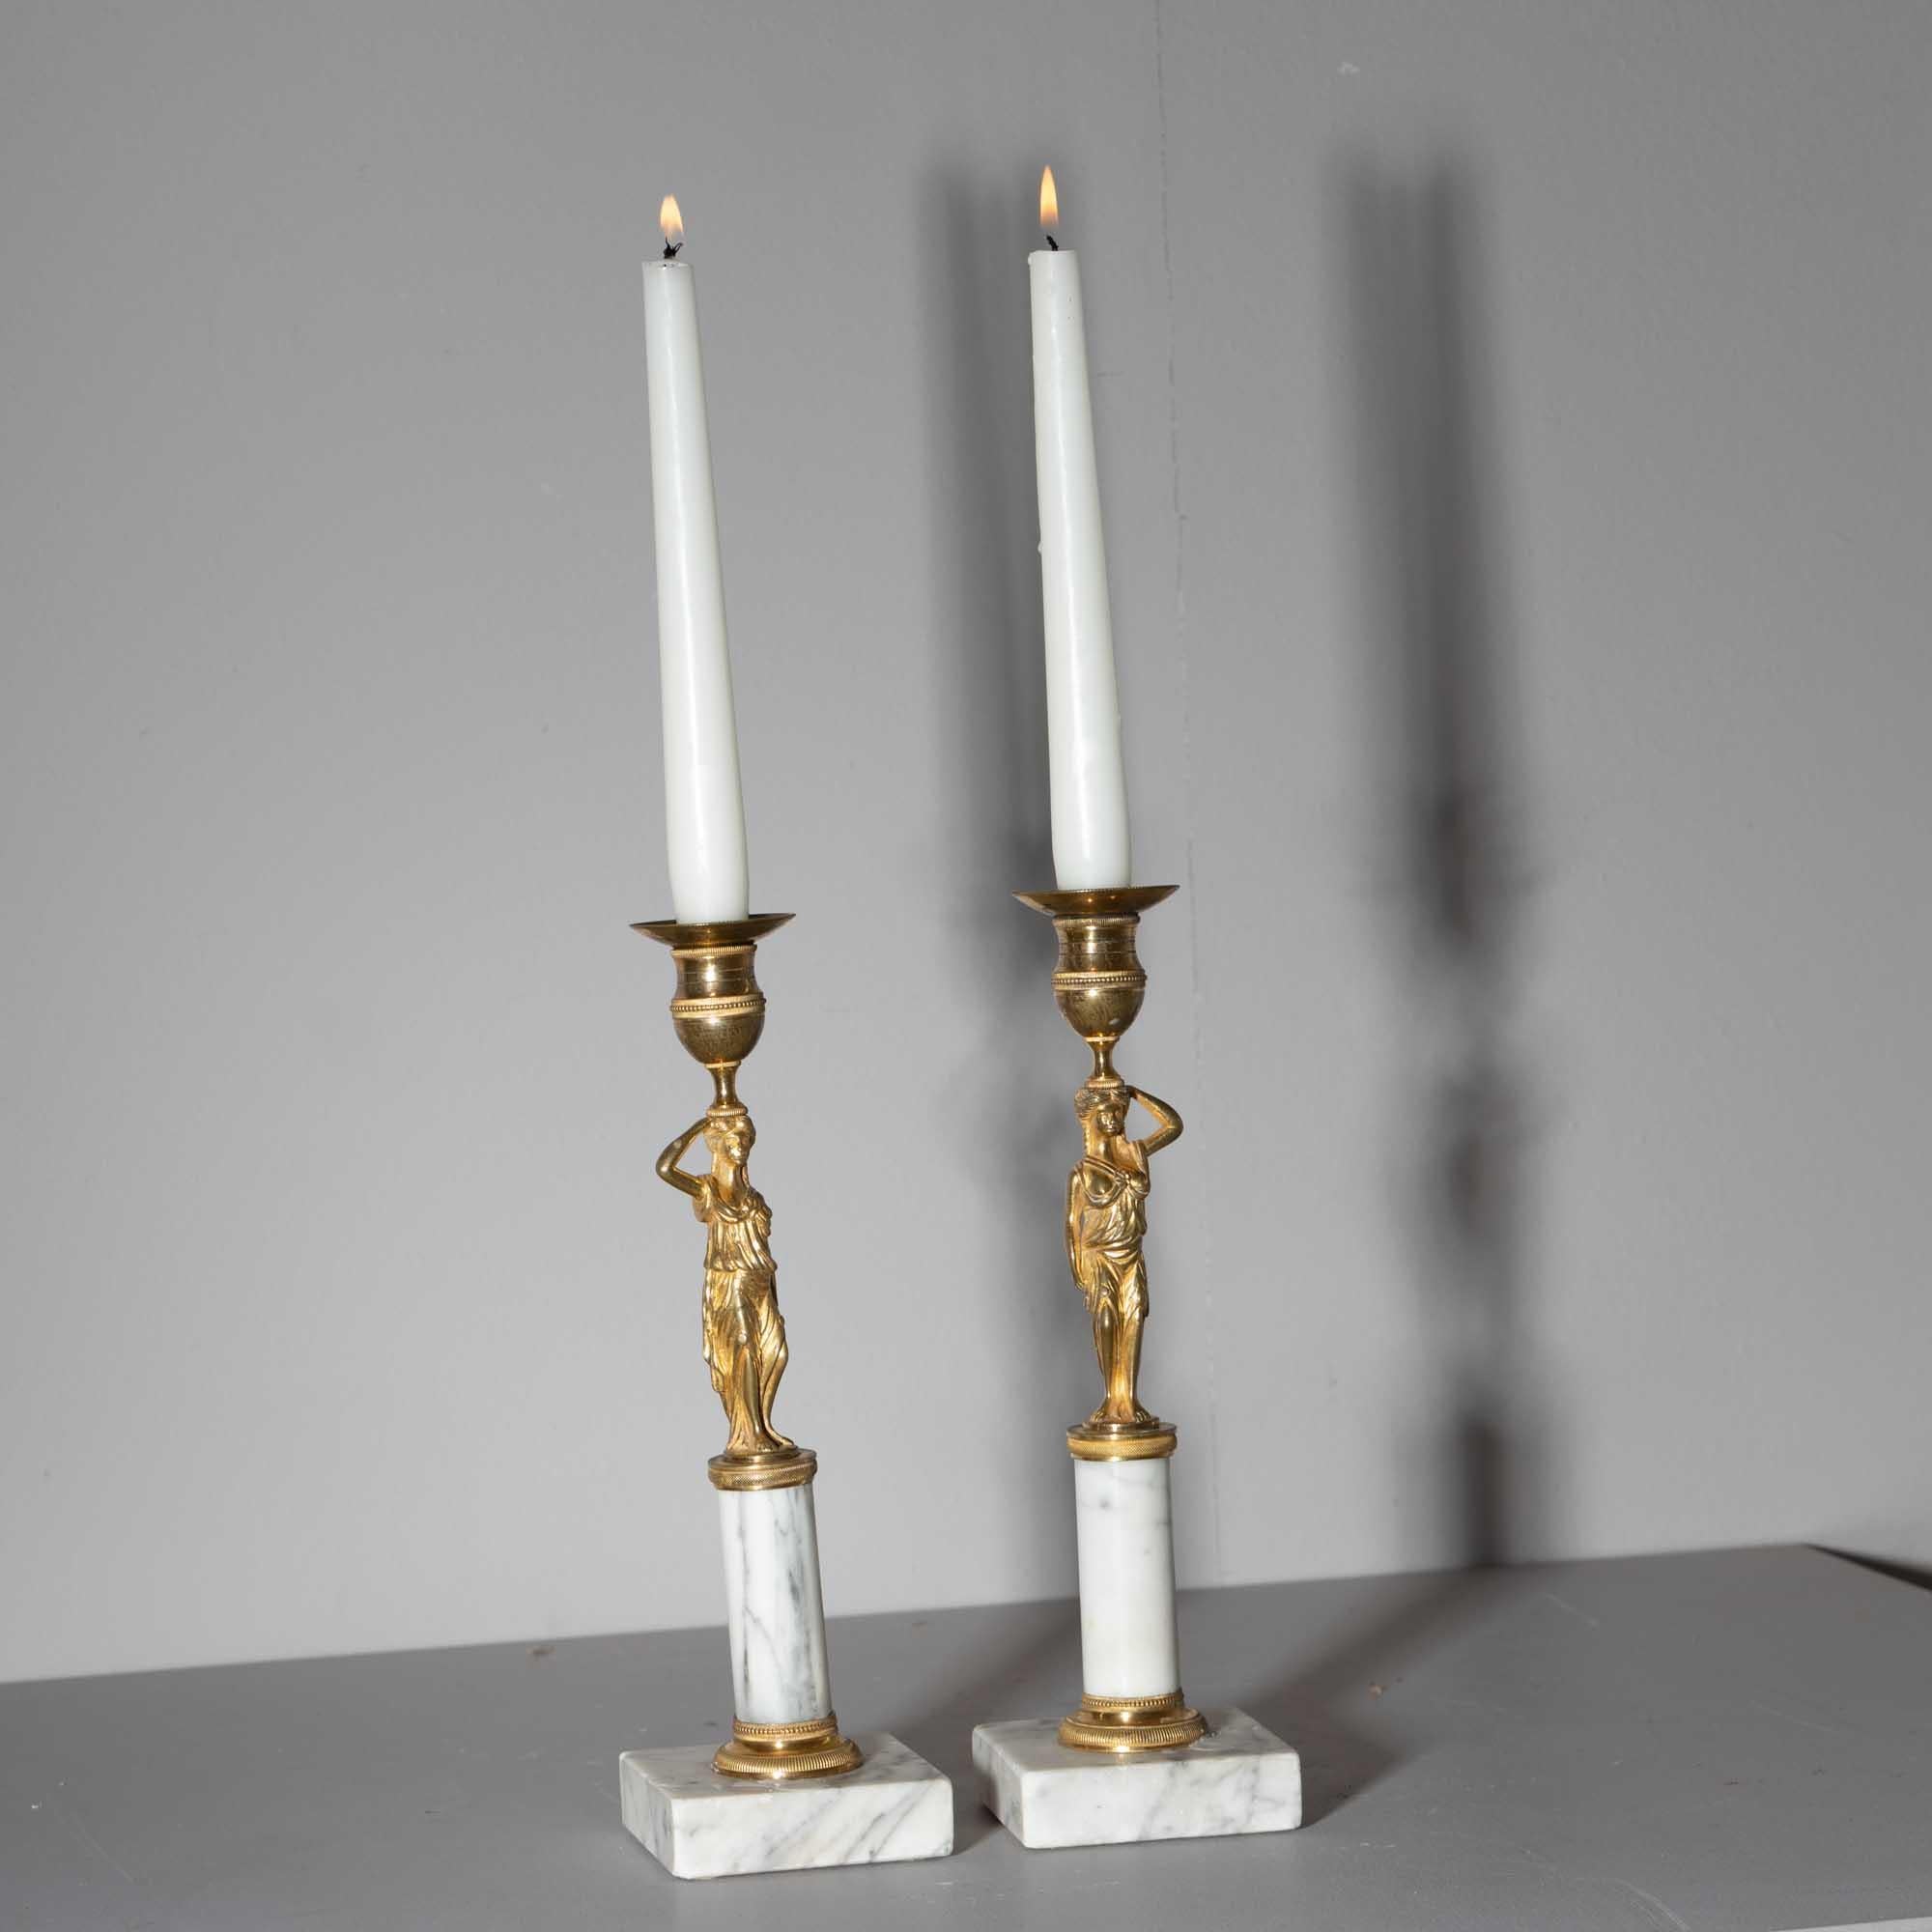 Pair of Candleholders with Karyatids, Bronze & Marble, Berlin Early 19th Century For Sale 2